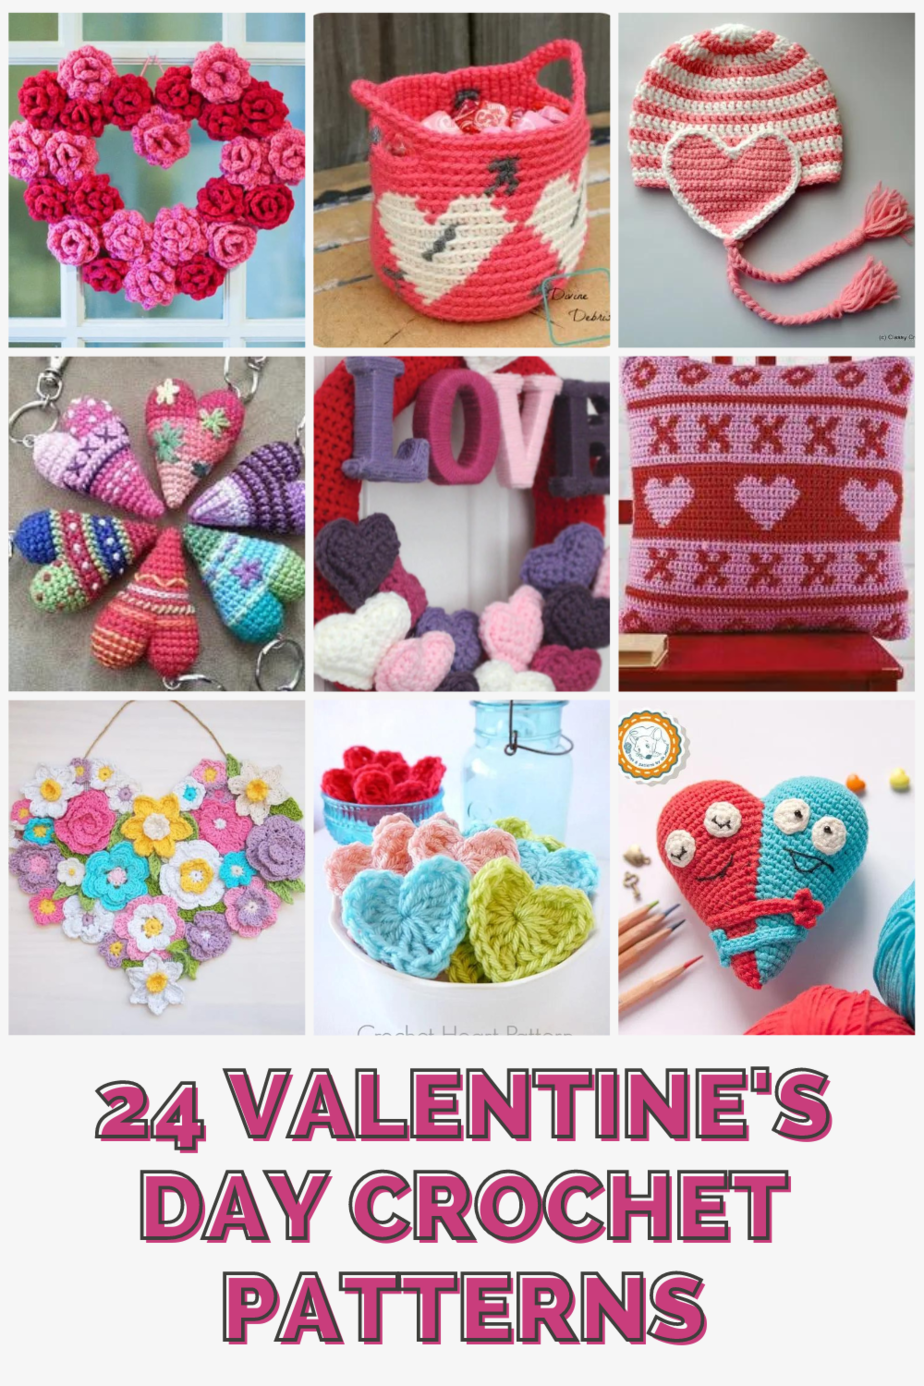 24 Valentine’s Day Crochet Patterns {Projects to put a little love on your hook!}